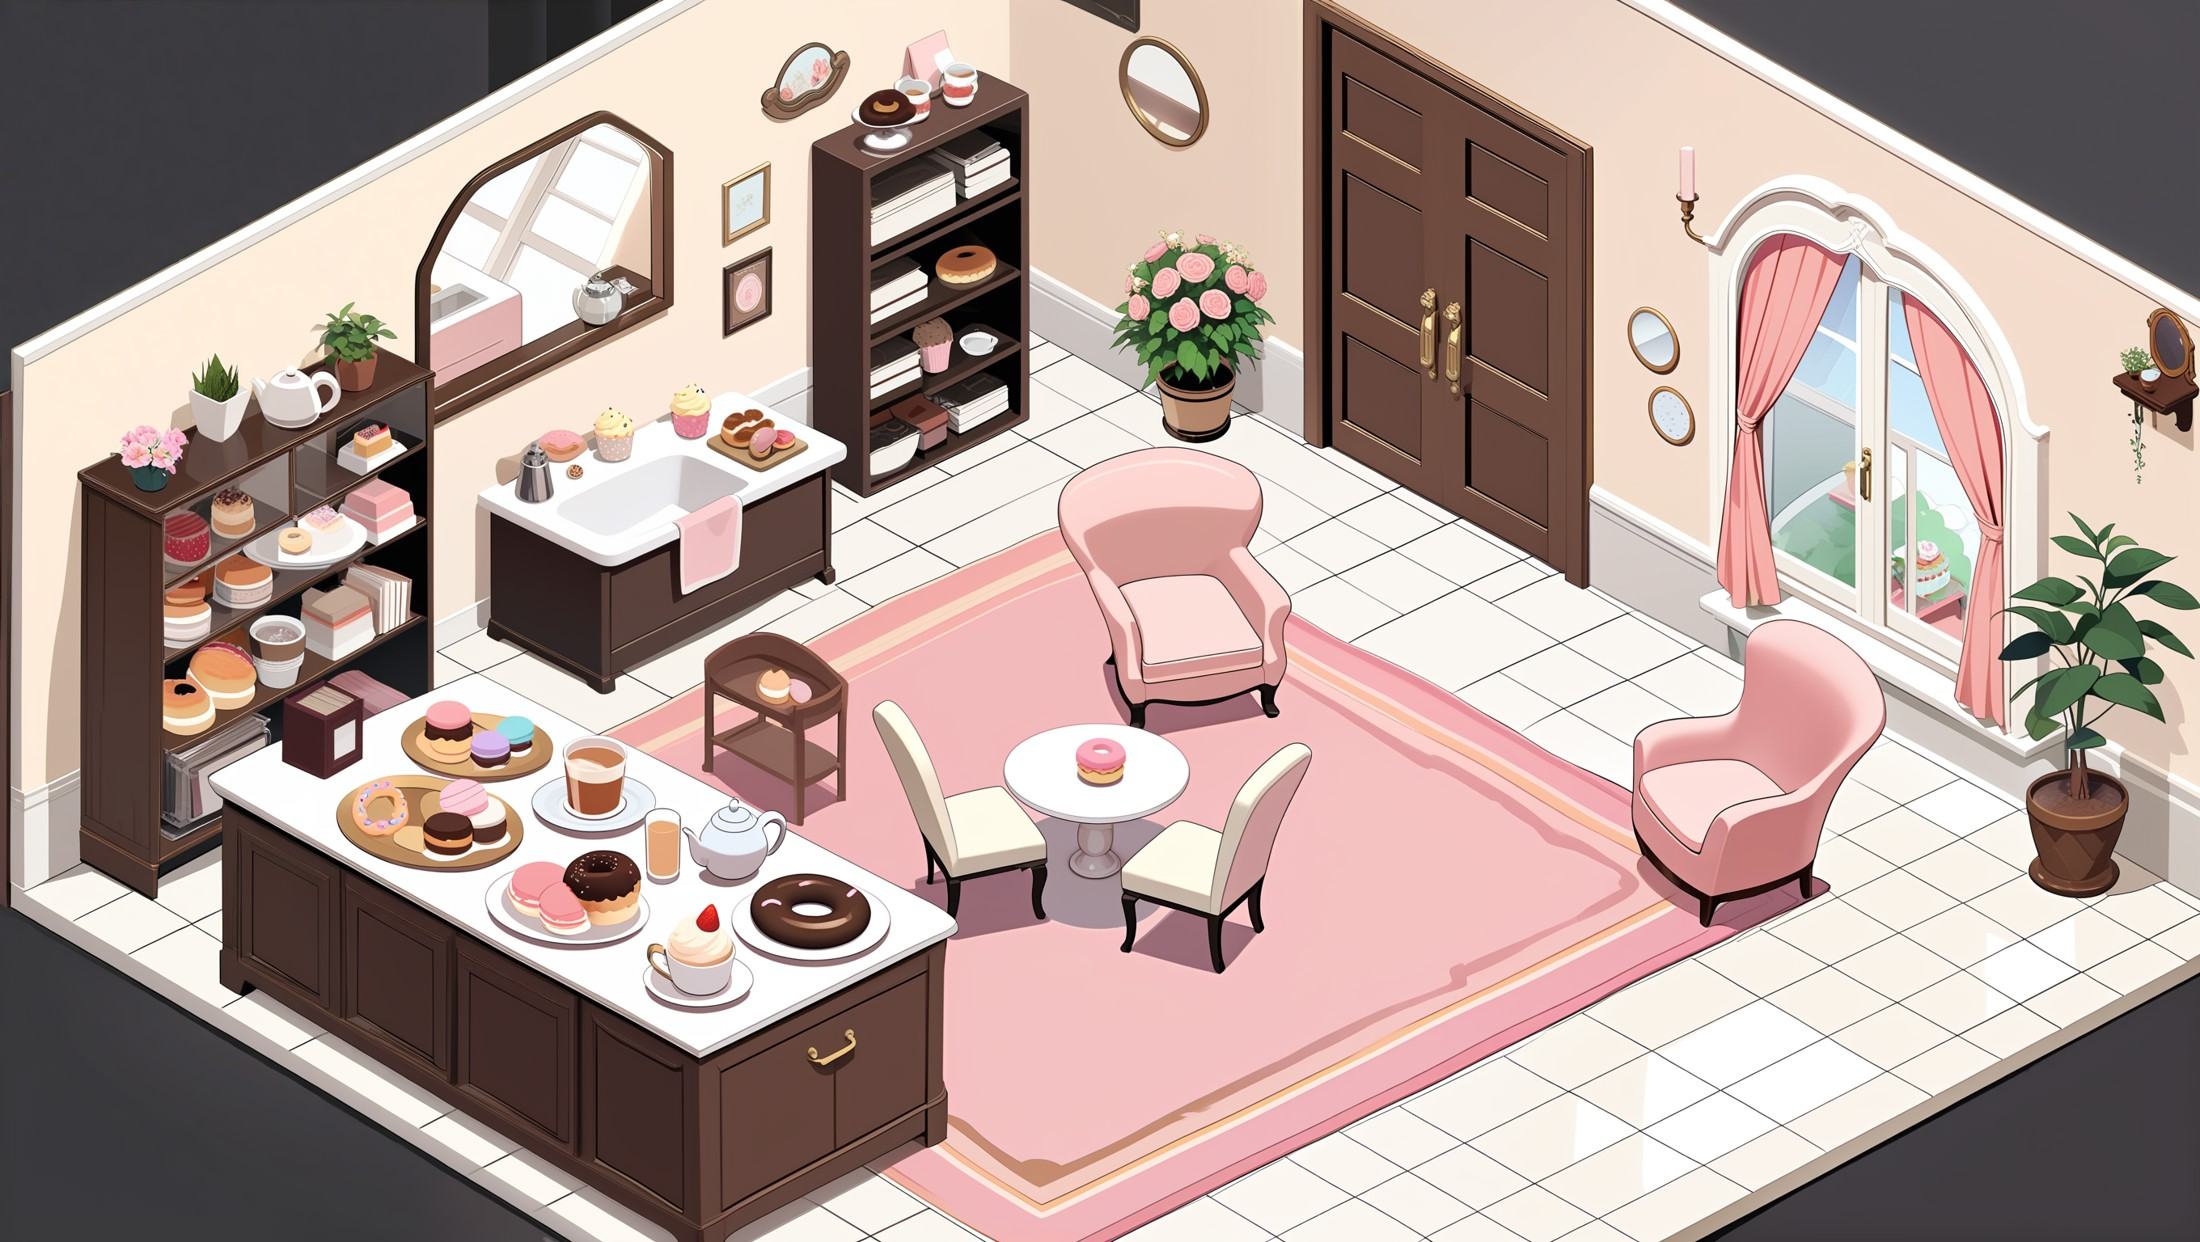 masterpiece,best quality,<lora:gamebg:0.5>,room-style,no humans,food,doughnut,indoors,cup,plant,shelf,plate,stuffed toy,cake,scenery,table,macaron,window,stuffed animal,candy,teacup,cupcake,cookie,book,door,teapot,flower,potted plant,mirror,chair,tiles,cake slice,sink,rug,food focus,box,ice cream,bathtub,